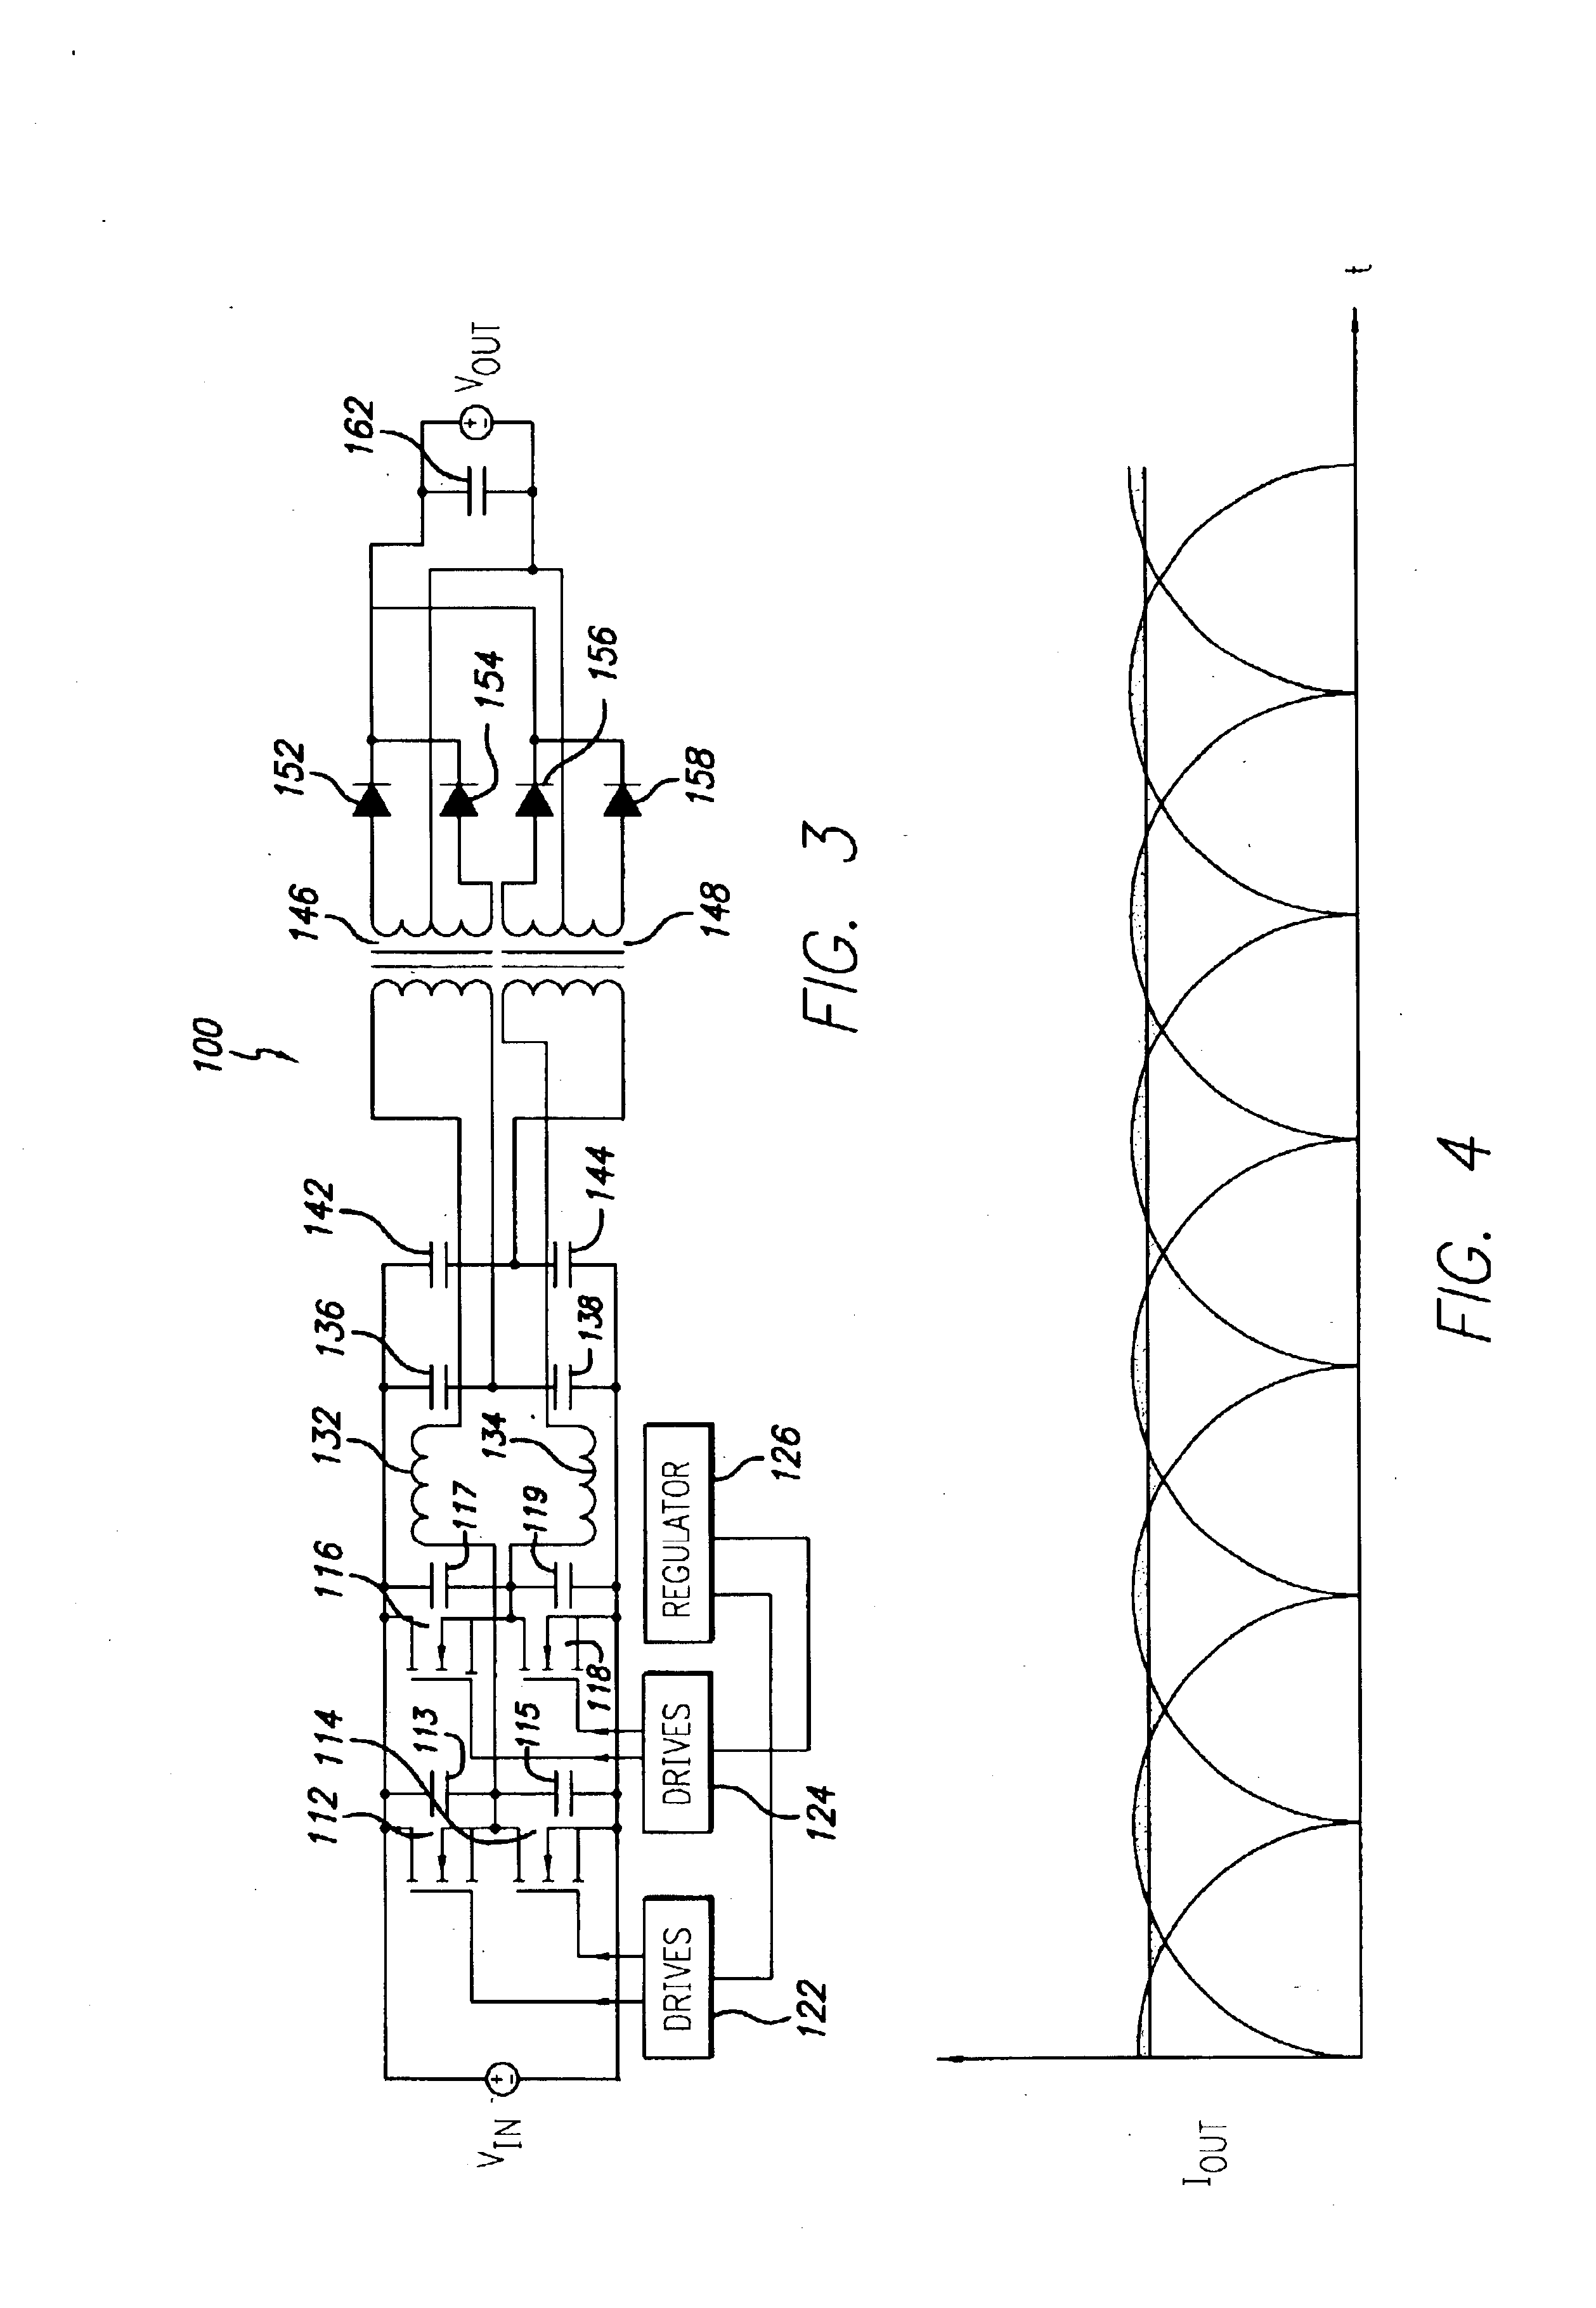 Phase-shifted resonant converter having reduced output ripple